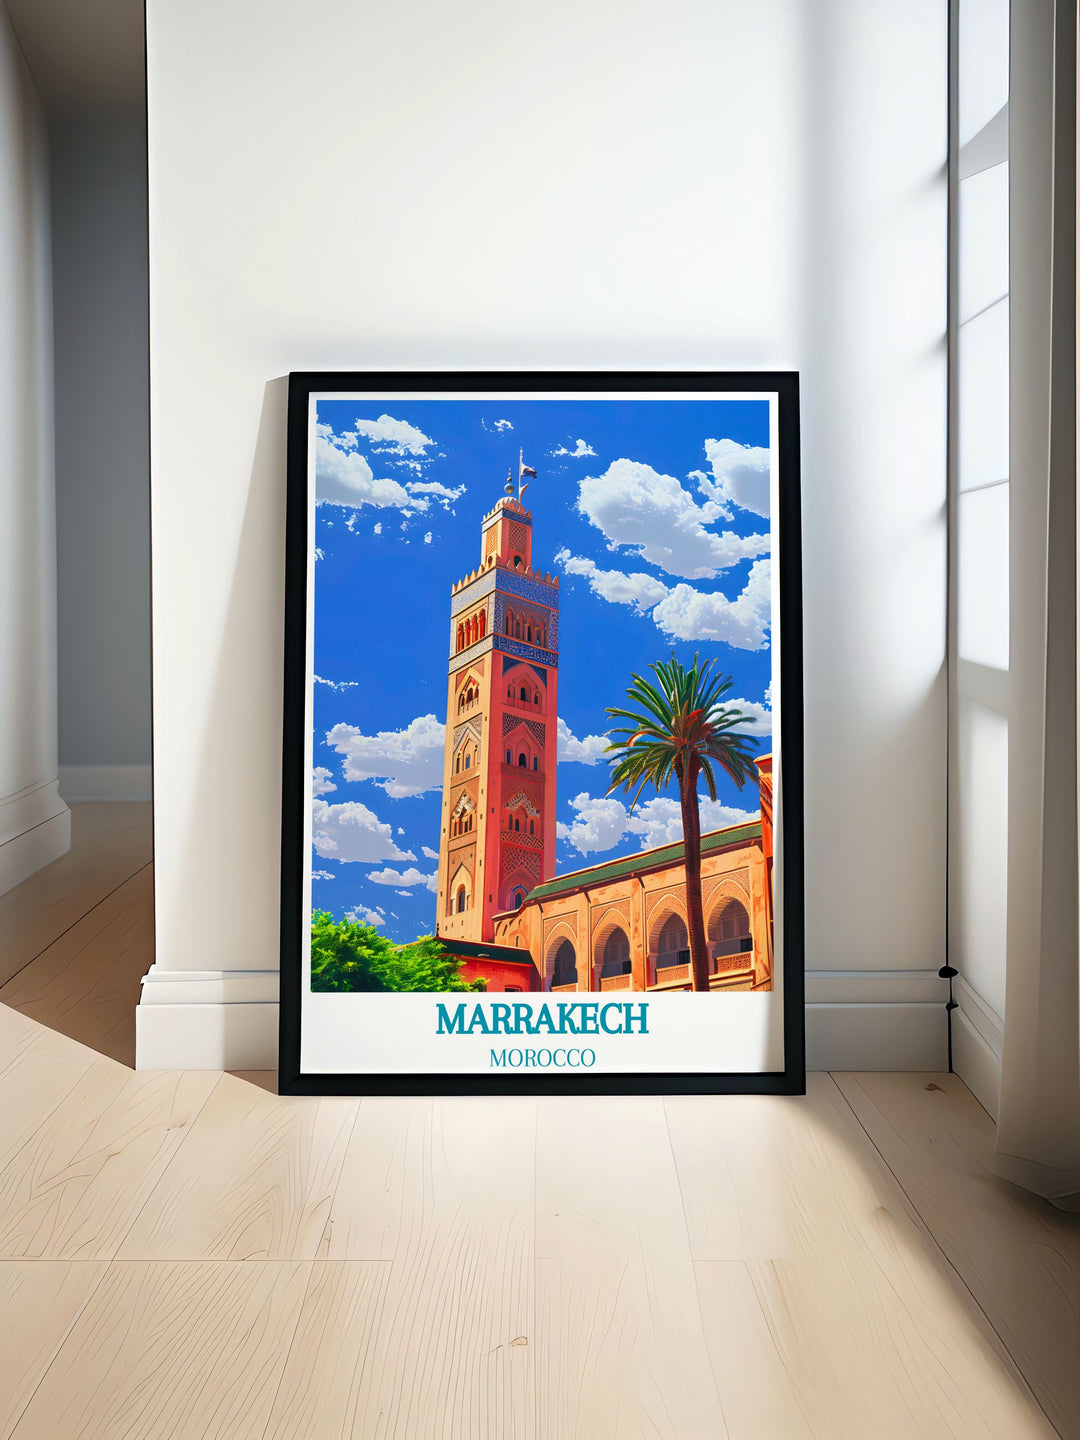 This travel poster beautifully depicts the historic allure of Marrakech and the natural beauty of Moroccos beaches, ideal for adding a touch of Moroccan culture to any room.